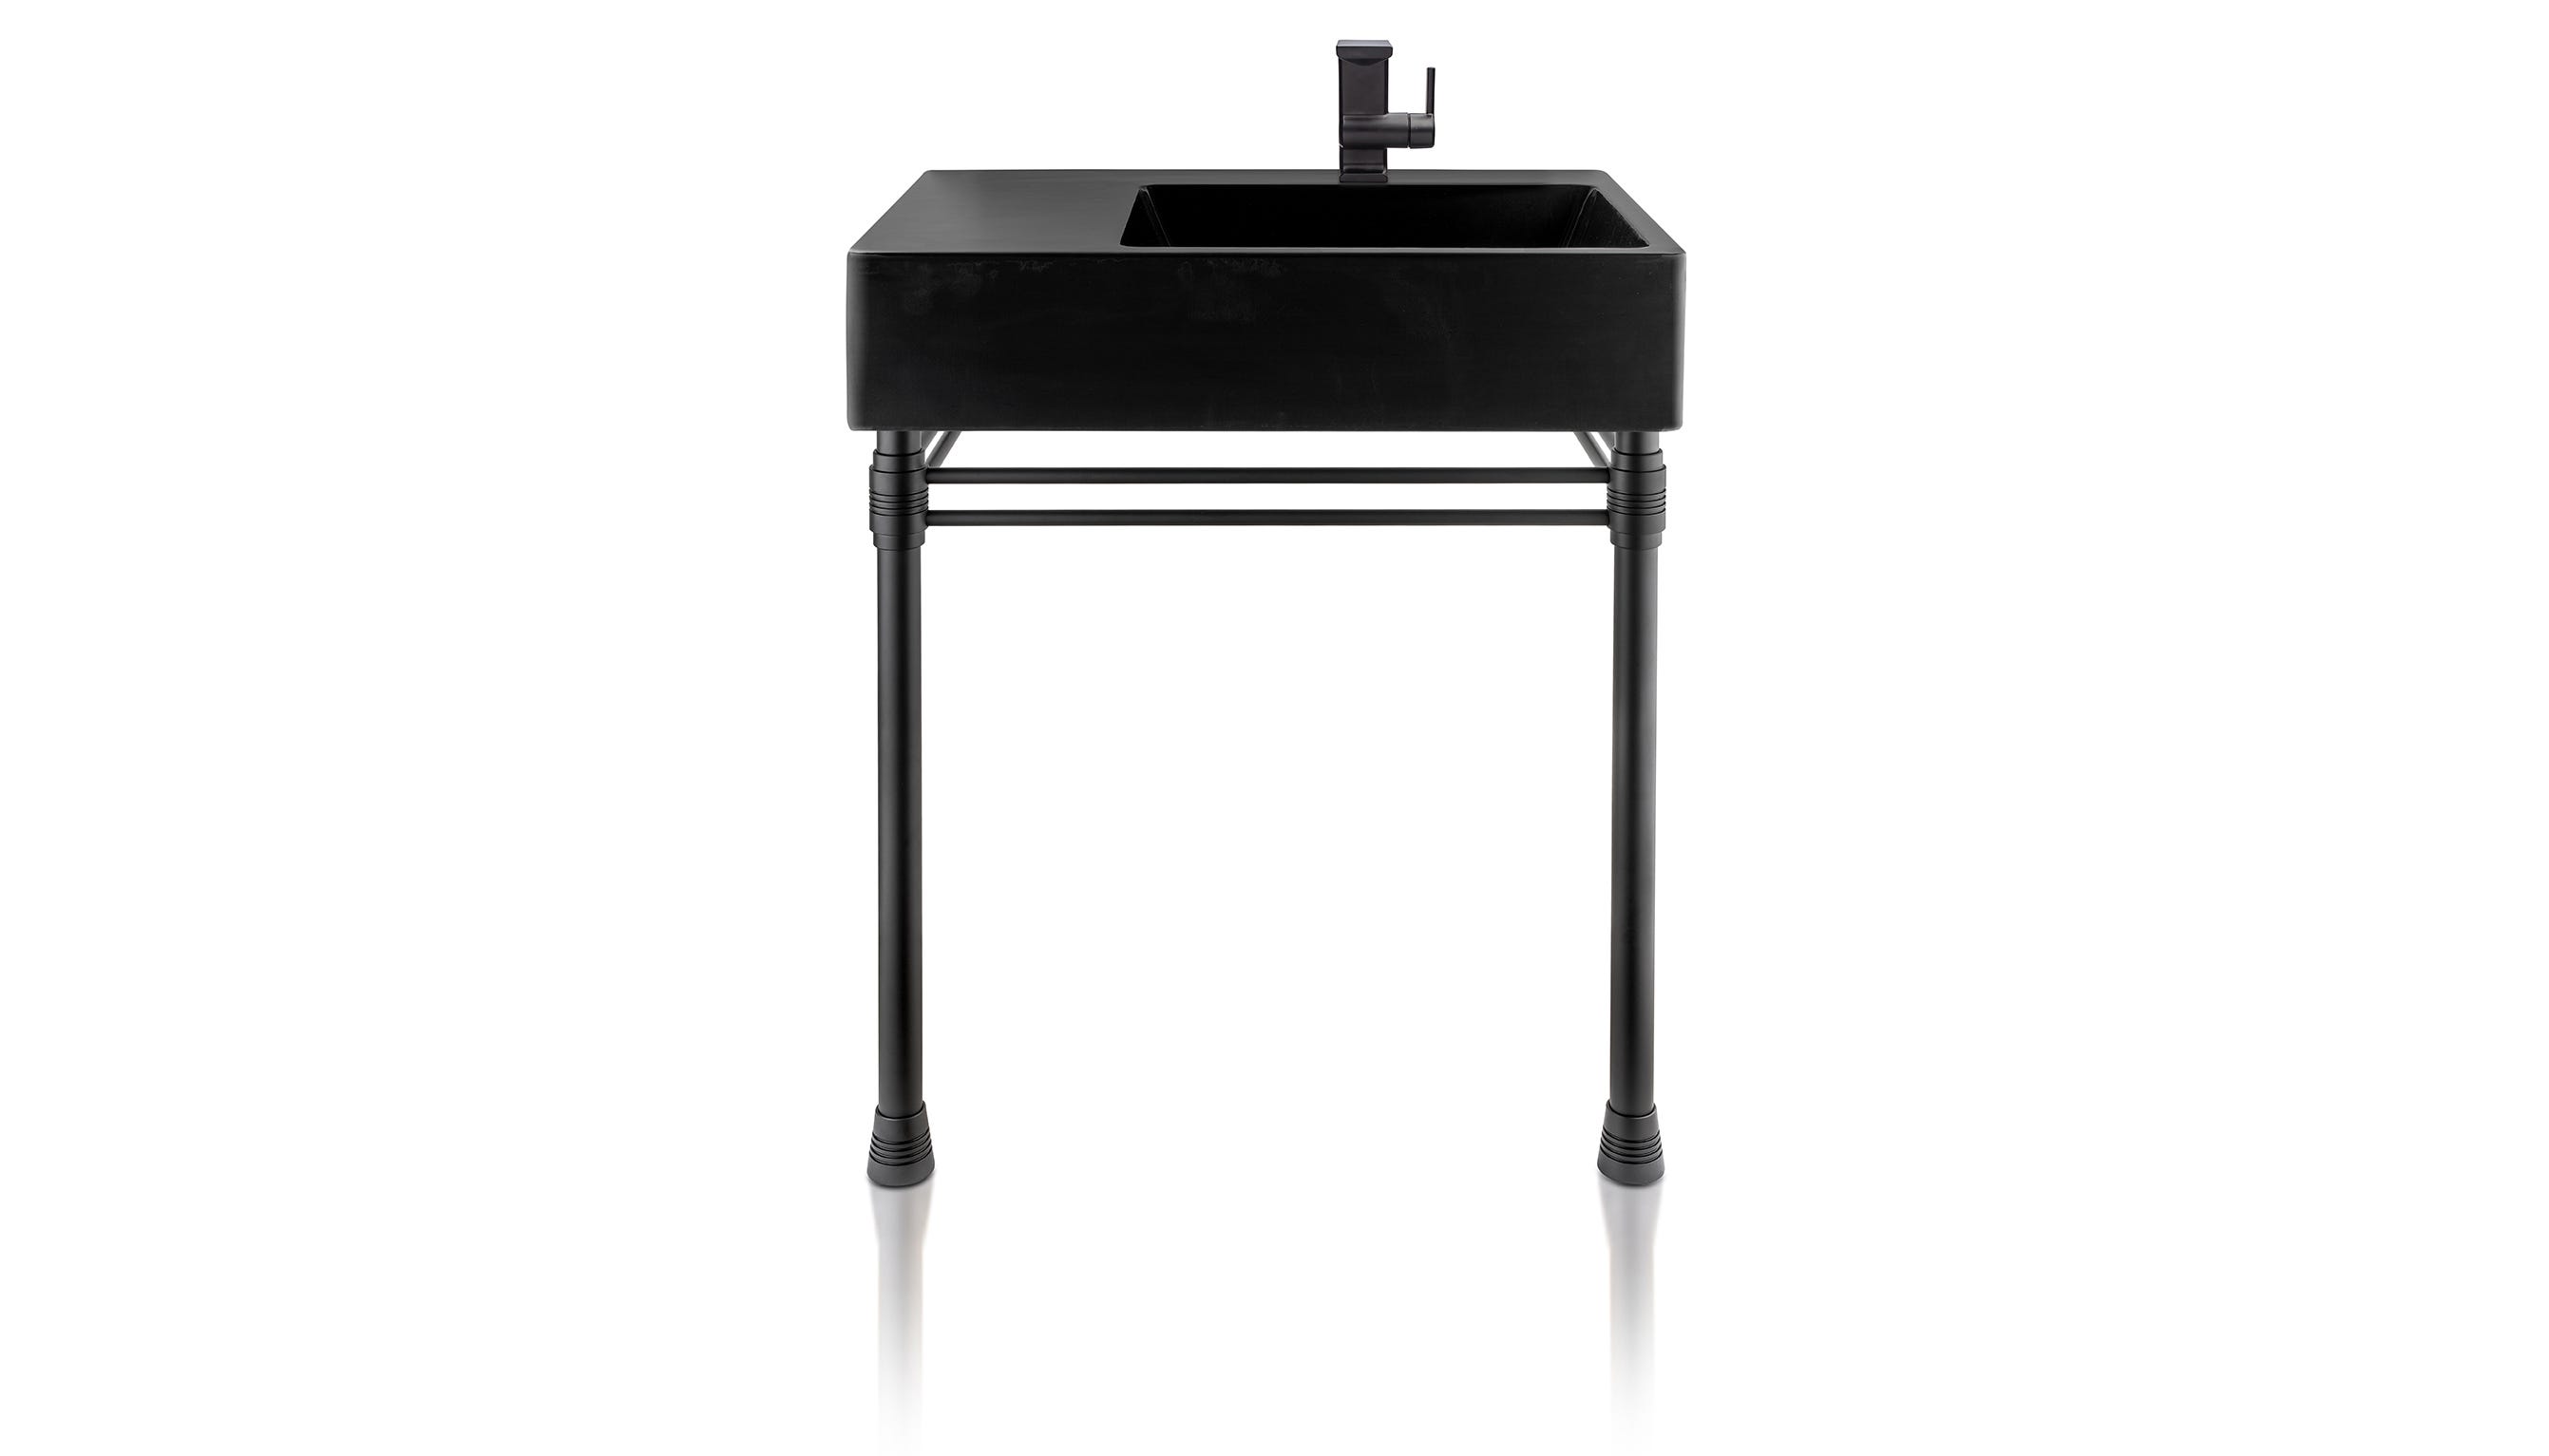 An asymmetrical sink with an industrial look is a striking silhouette in matte black. The Escondido Vanity from Thompson Traders has an off-center design that offers additional counter space. Its sleek shape is elegance and grace in harmony. This is a new matte black finish from Thompson Traders, created by expert coppersmiths in Santa Clara del Cobre, Mexico. It complements popular design trends today.